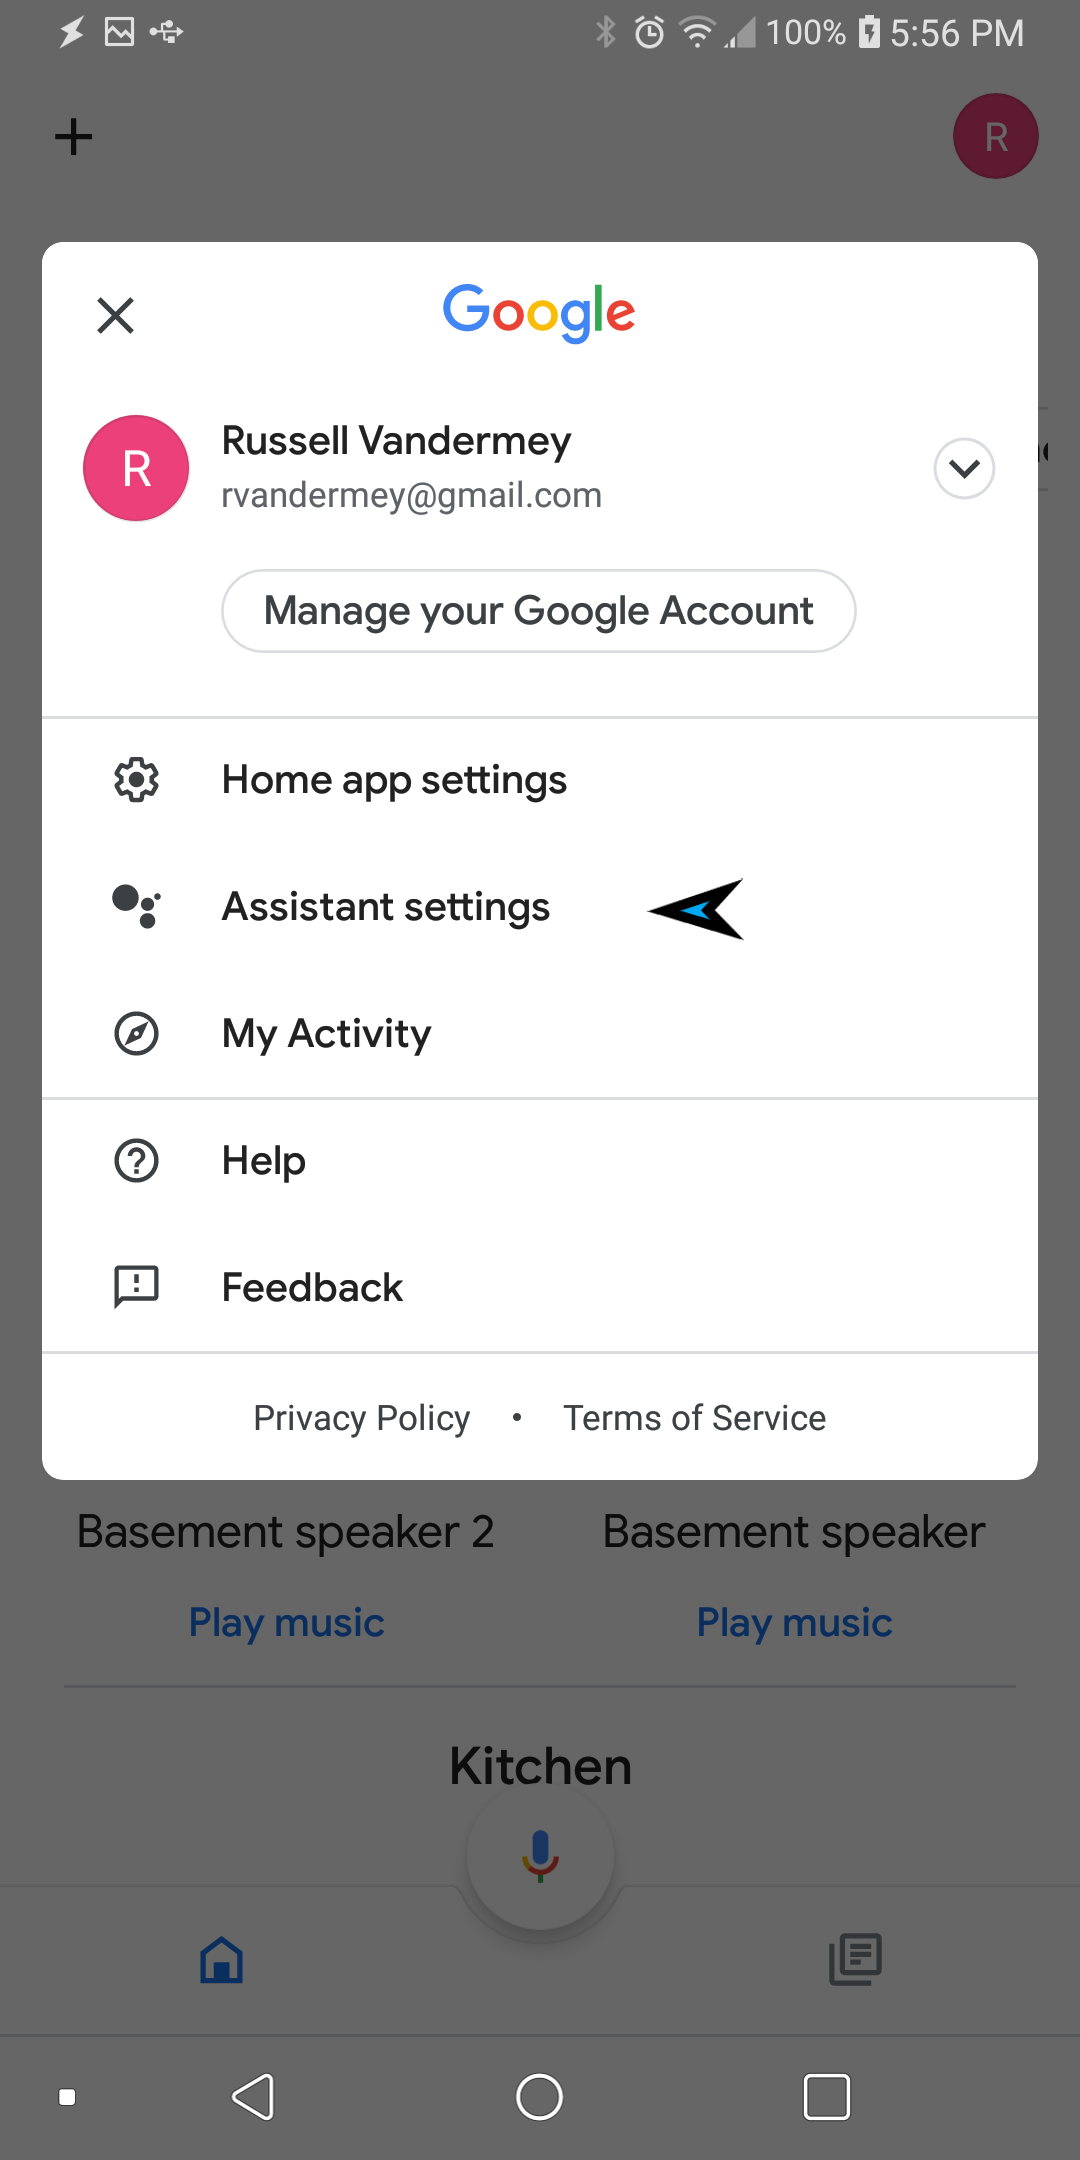 Assistant settings